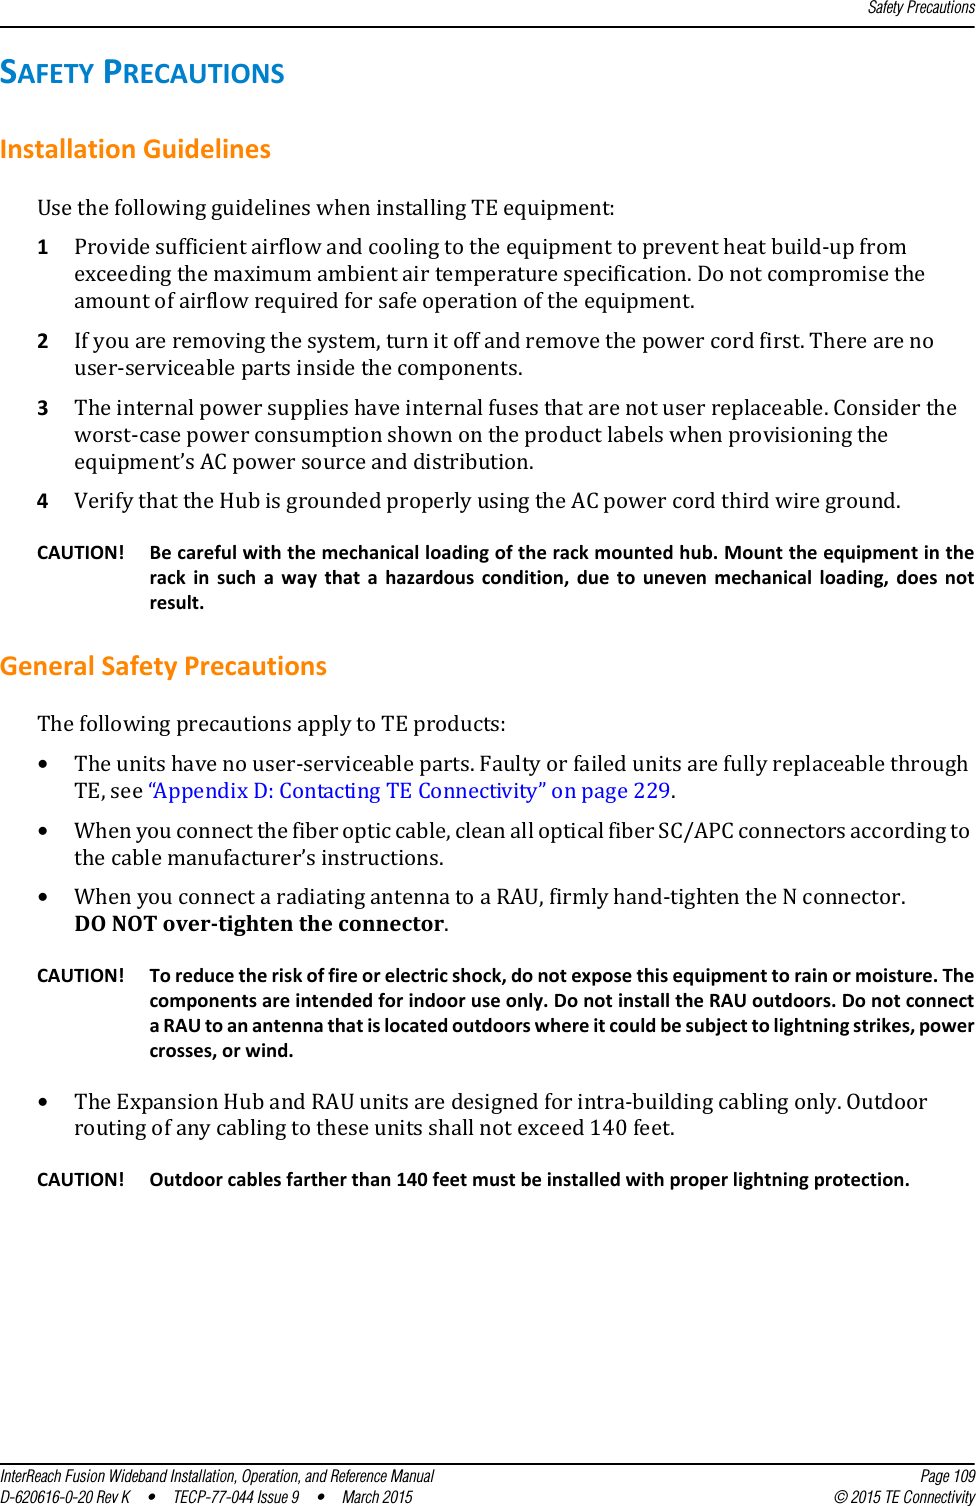 Safety PrecautionsInterReach Fusion Wideband Installation, Operation, and Reference Manual Page 109D-620616-0-20 Rev K  •  TECP-77-044 Issue 9  •  March 2015 © 2015 TE ConnectivitySAFETY PRECAUTIONSInstallation GuidelinesUse the following guidelines when installing TE equipment:1Provide sufficient airflow and cooling to the equipment to prevent heat build-up from exceeding the maximum ambient air temperature specification. Do not compromise the amount of airflow required for safe operation of the equipment.2If you are removing the system, turn it off and remove the power cord first. There are no user-serviceable parts inside the components.3The internal power supplies have internal fuses that are not user replaceable. Consider the worst-case power consumption shown on the product labels when provisioning the equipment’s AC power source and distribution.4Verify that the Hub is grounded properly using the AC power cord third wire ground.CAUTION! Be careful with the mechanical loading of the rack mounted hub. Mount the equipment in the rack in such a way that a hazardous condition, due to uneven mechanical loading, does not result.General Safety PrecautionsThe following precautions apply to TE products:•The units have no user-serviceable parts. Faulty or failed units are fully replaceable through TE, see “Appendix D: Contacting TE Connectivity” on page 229.•When you connect the fiber optic cable, clean all optical fiber SC/APC connectors according to the cable manufacturer’s instructions.•When you connect a radiating antenna to a RAU, firmly hand-tighten the N connector. DO NOT over-tighten the connector.CAUTION! To reduce the risk of fire or electric shock, do not expose this equipment to rain or moisture. The components are intended for indoor use only. Do not install the RAU outdoors. Do not connect a RAU to an antenna that is located outdoors where it could be subject to lightning strikes, power crosses, or wind.•The Expansion Hub and RAU units are designed for intra-building cabling only. Outdoor routing of any cabling to these units shall not exceed 140 feet.CAUTION! Outdoor cables farther than 140 feet must be installed with proper lightning protection.